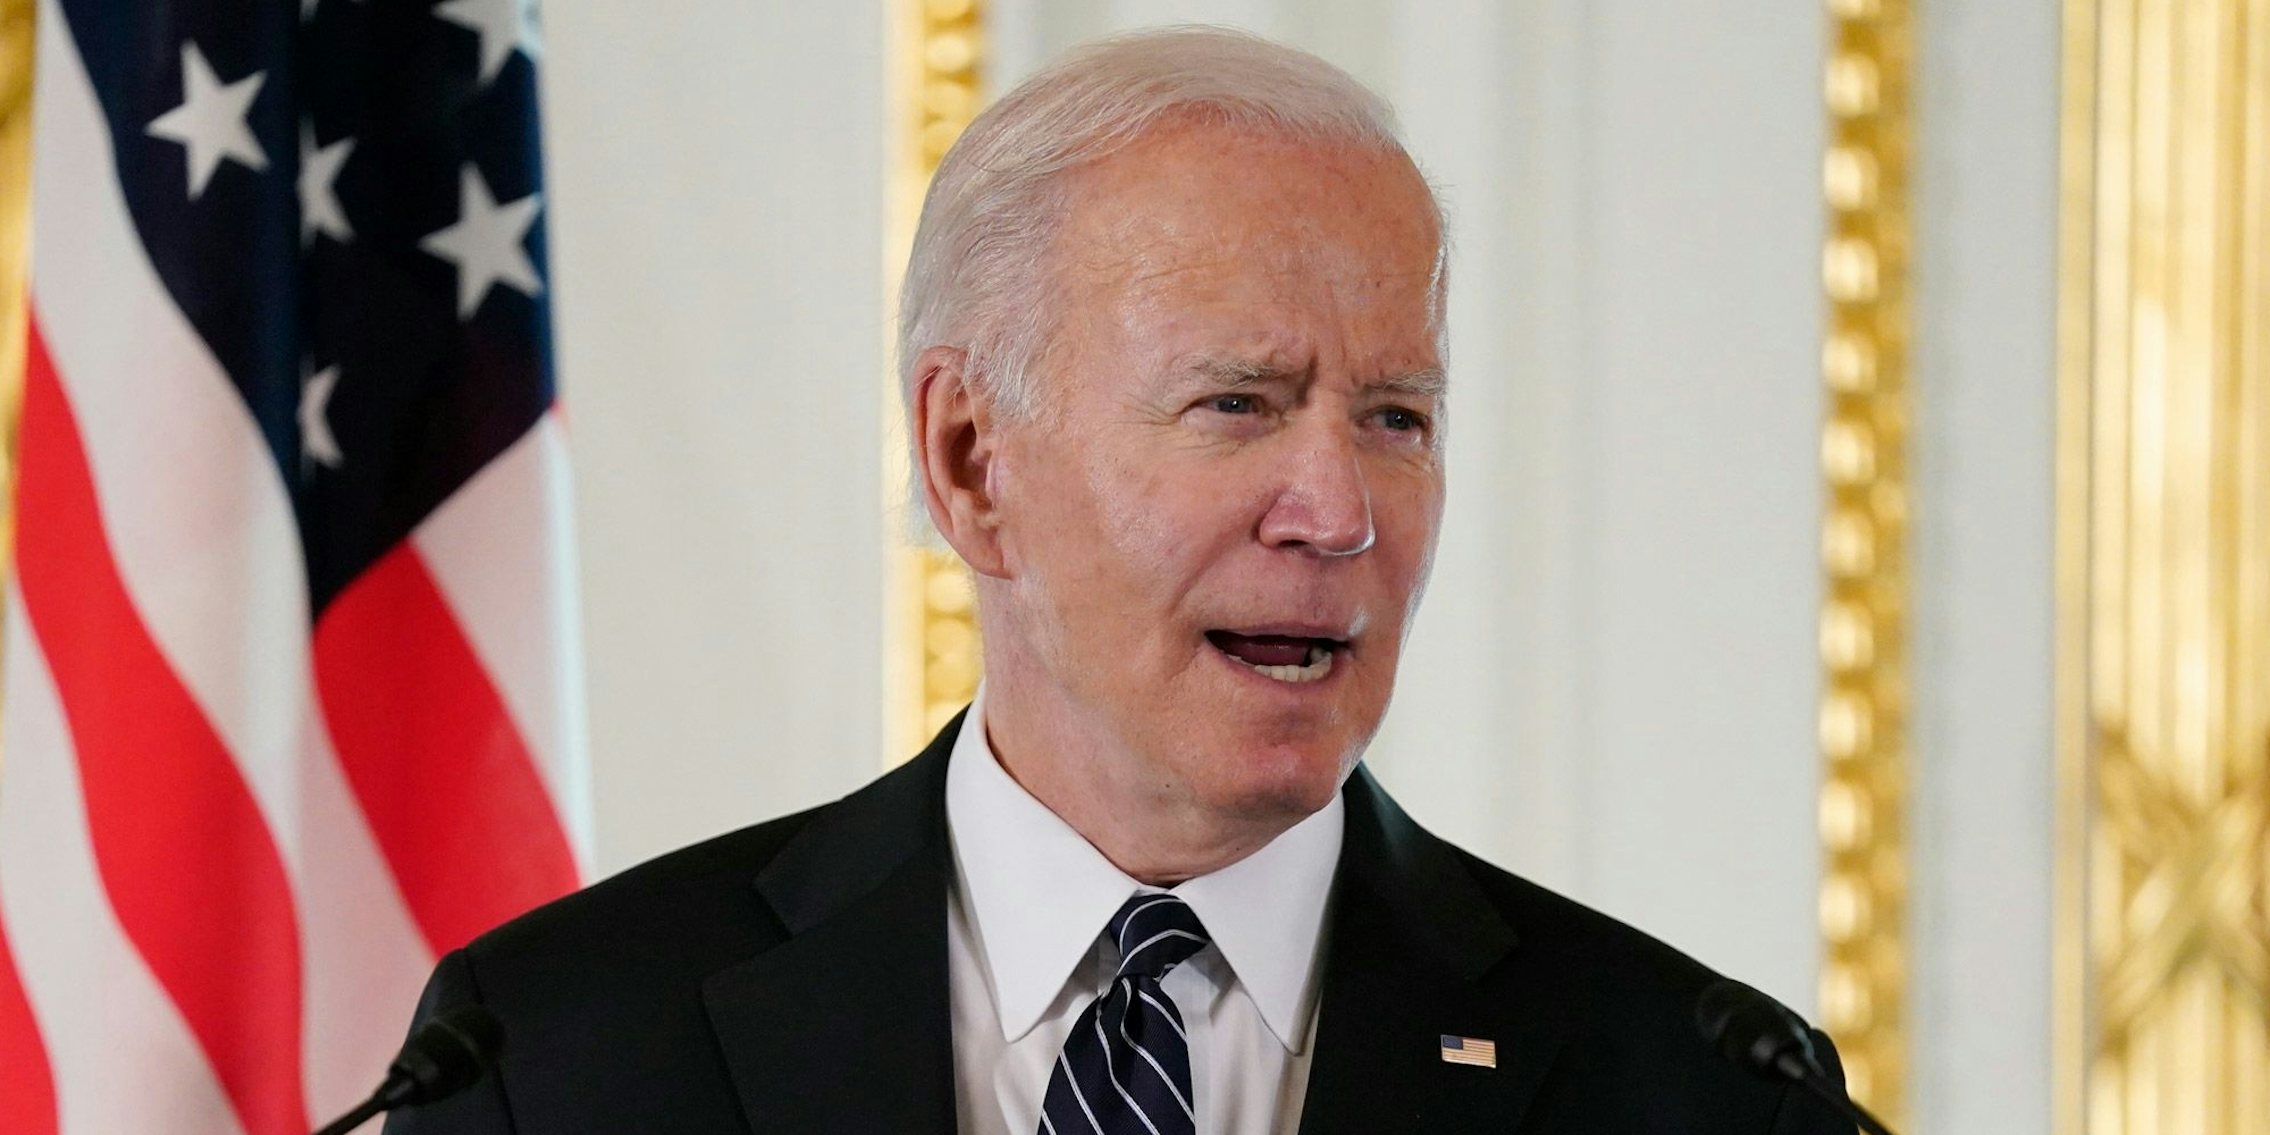 Joe Biden speaking into microphones in front of white and gold background with American flag to his left